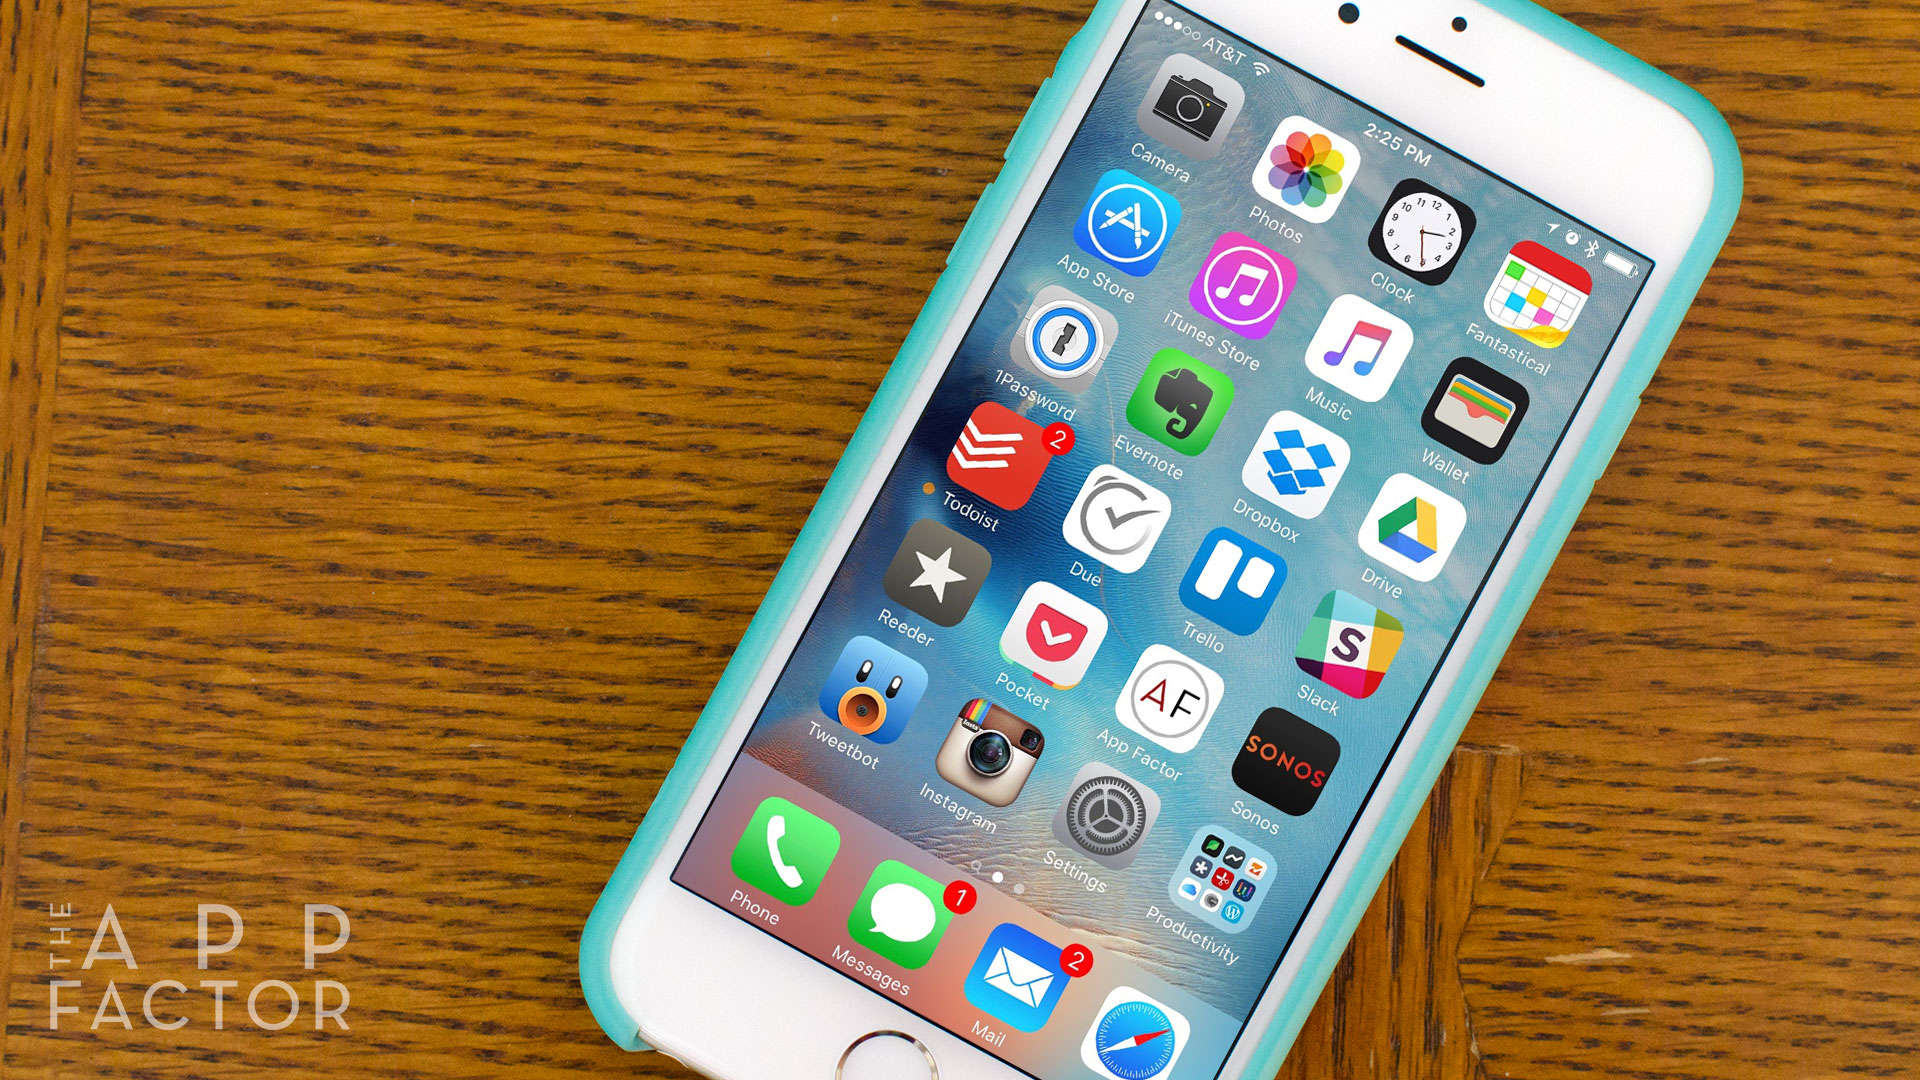 If your iPhone feels a little sluggish, here are 4 easy tips to help speed it up again!